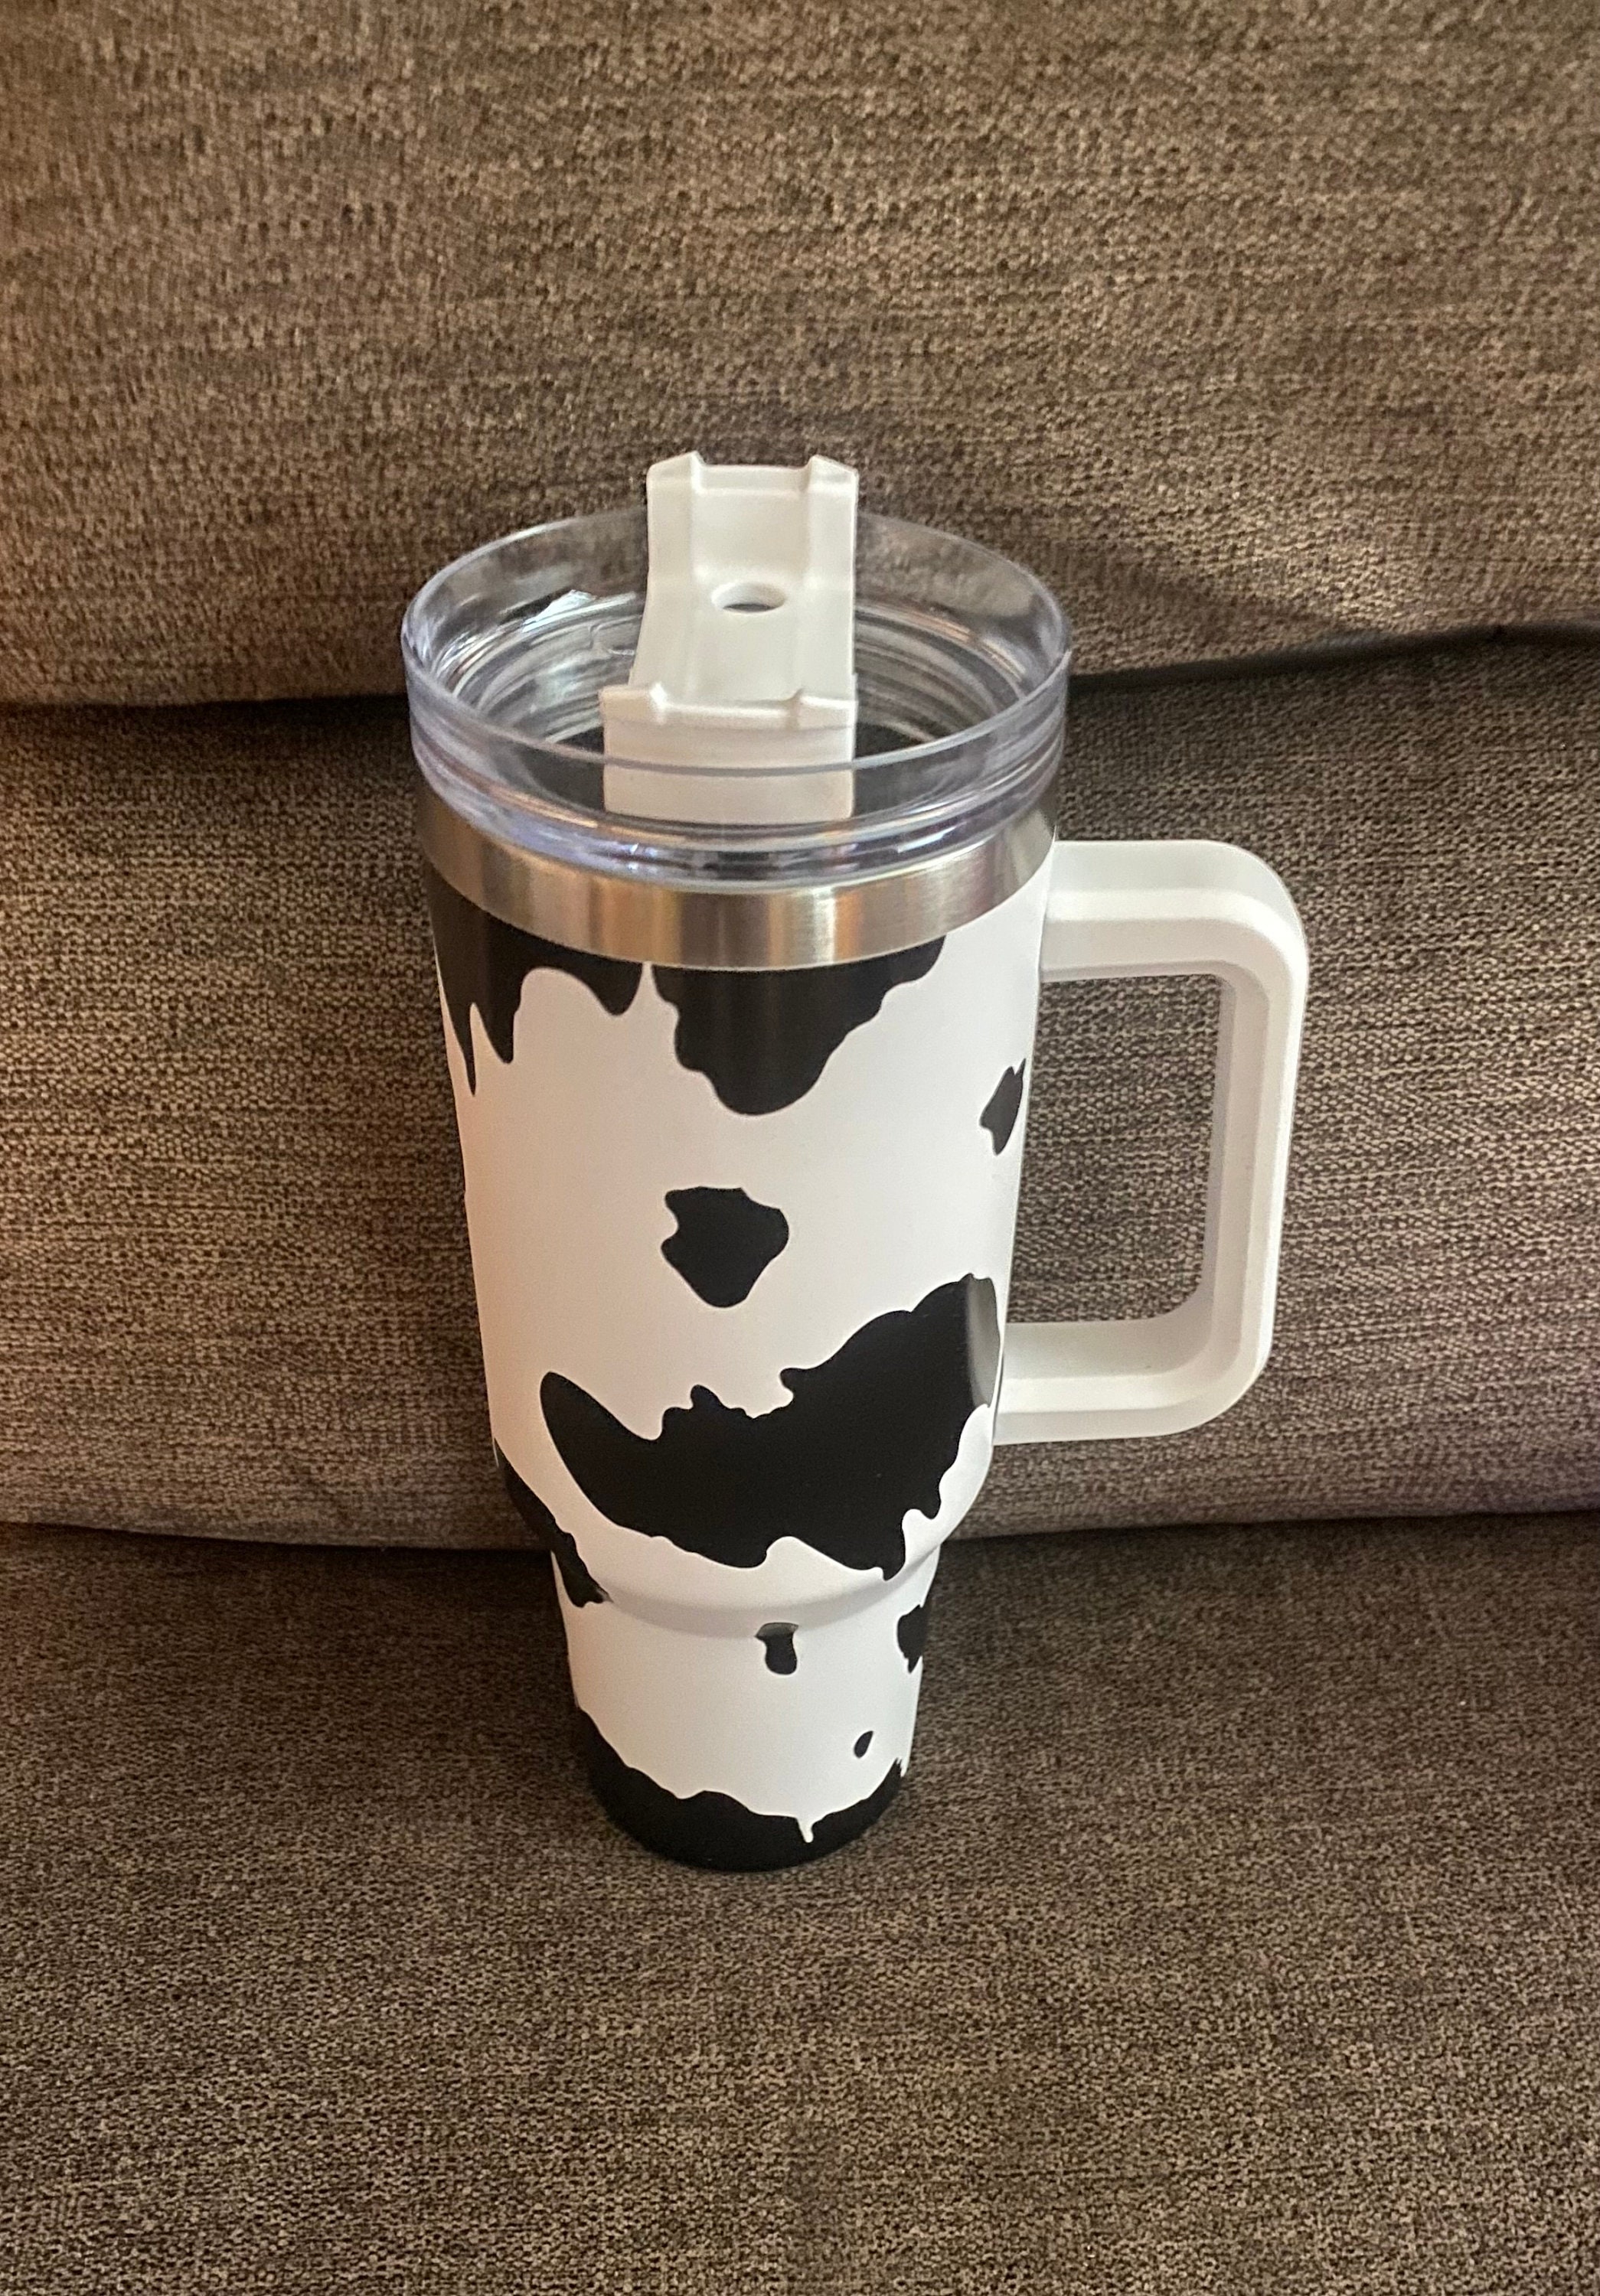 Cow Print Tumbler, 40 Oz Tumbler with Handle and Straw, Cute Cow Print Cup/Coffee  Mug/Travel Mug, Brown Cow Print Stuff/Decor, Fun Cow Gifts for Cow Lovers  Women, 40 Oz Stainless Steel Tumbler